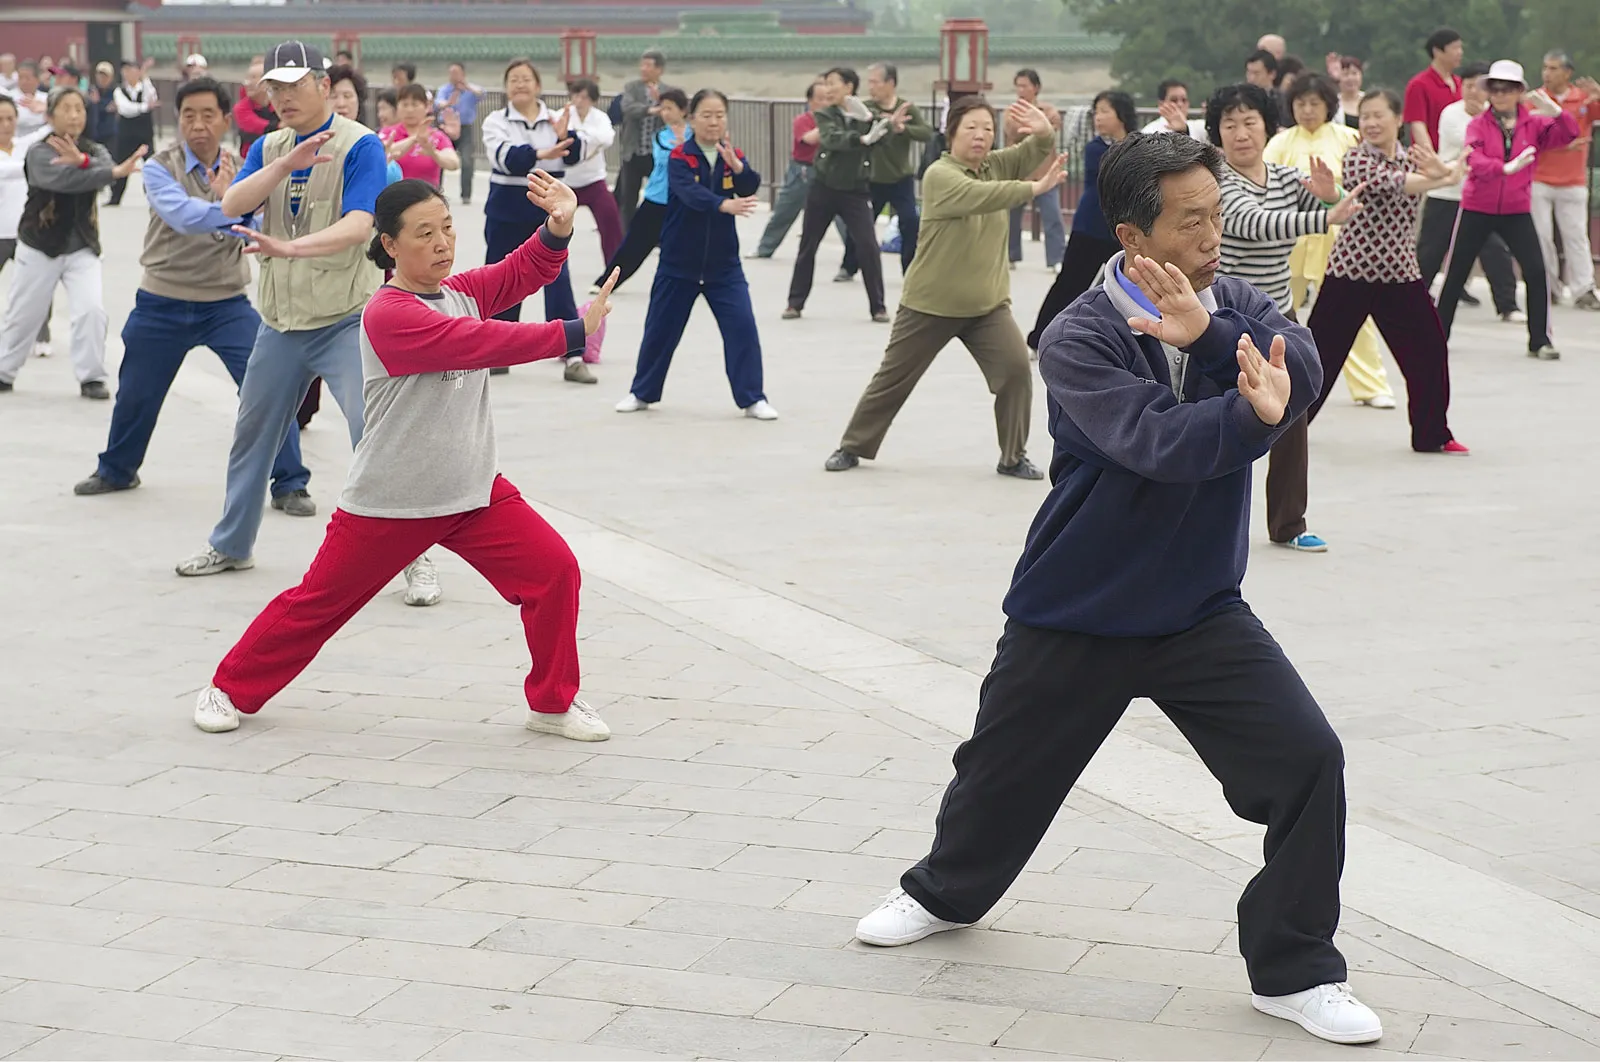 16 Facts About Tai Chi - Facts.net